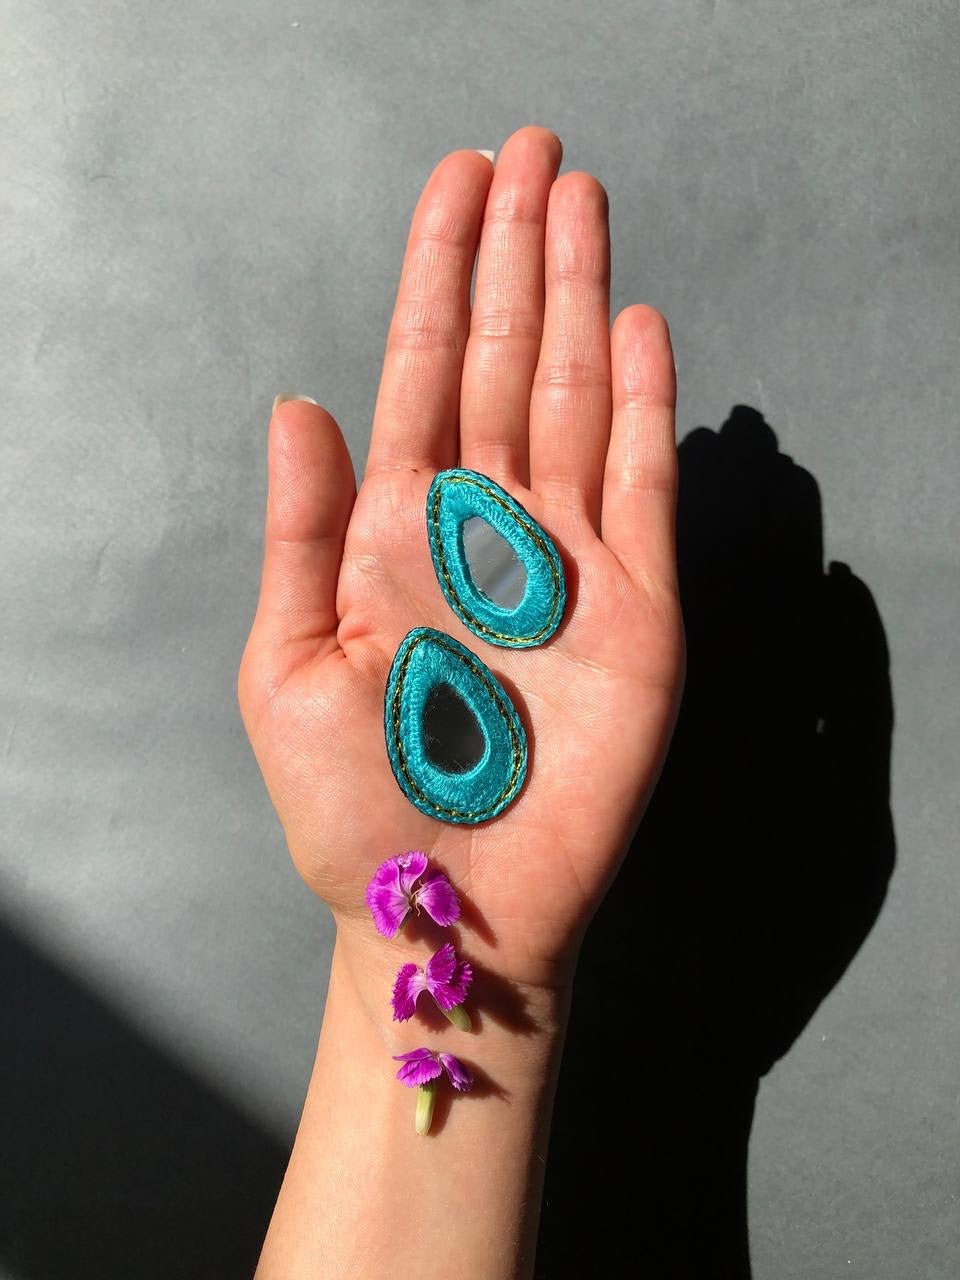 Handmade Embroidered Oval Earrings With Turquoise Thread and mirror